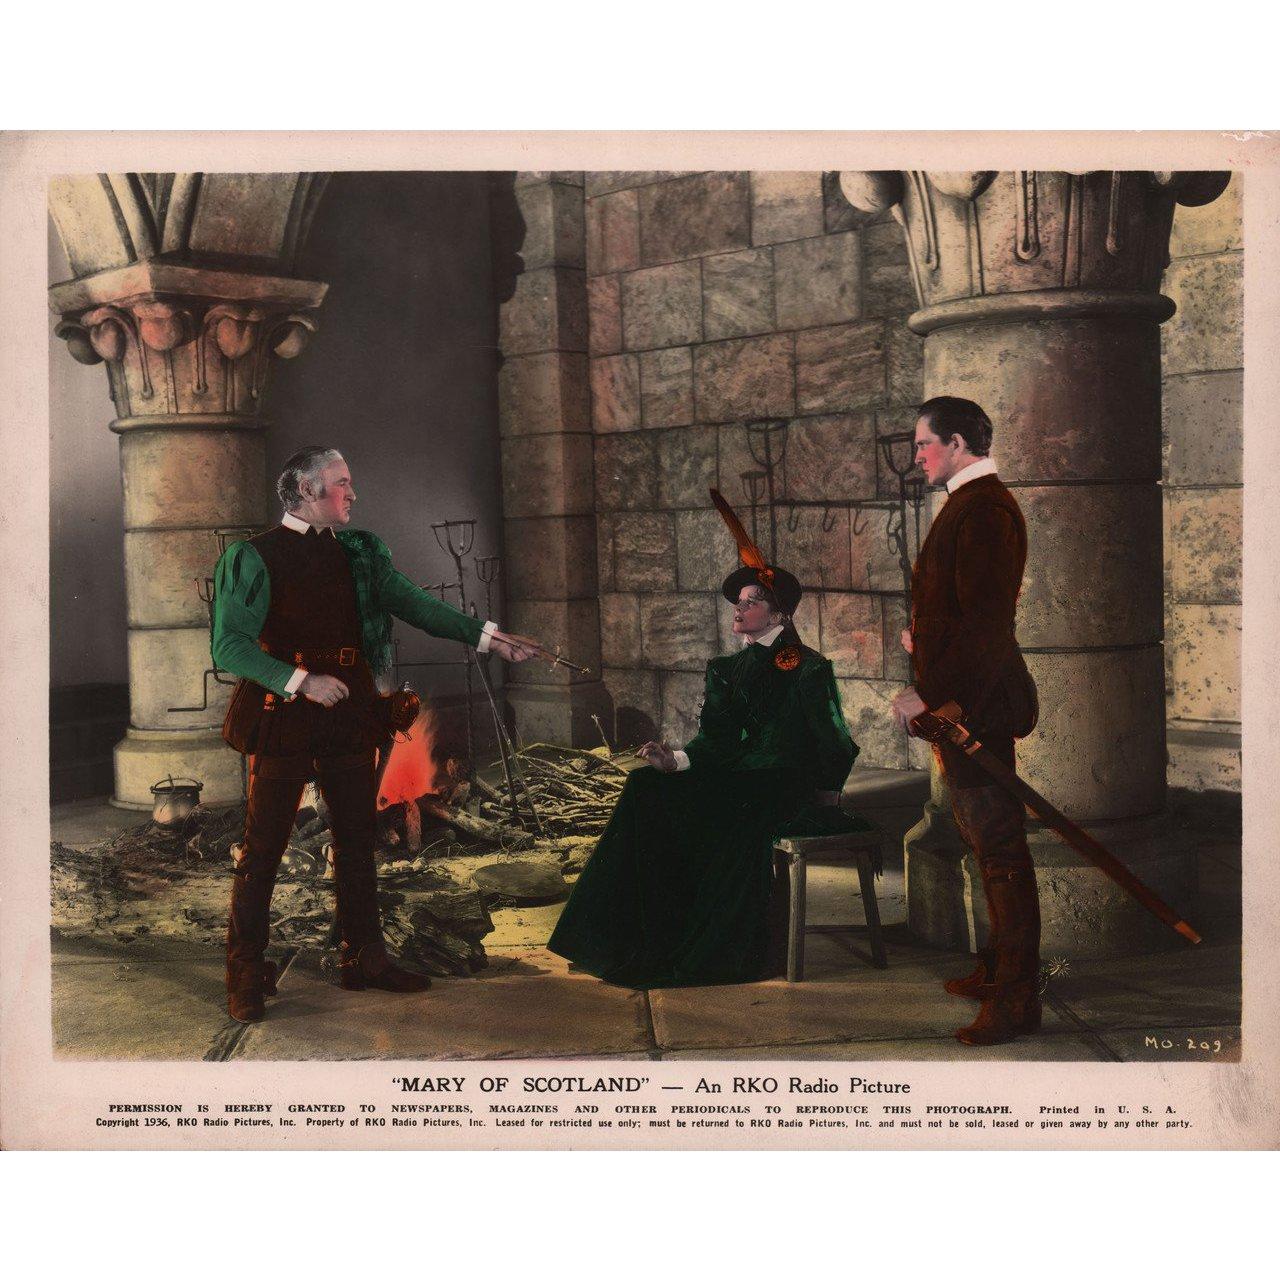 Original 1936 US color photo for the film Mary of Scotland directed by John Ford / Leslie Goodwins with Katharine Hepburn / Fredric March / Florence Eldridge / Douglas Walton. Very good-fine condition. Please note: the size is stated in inches and